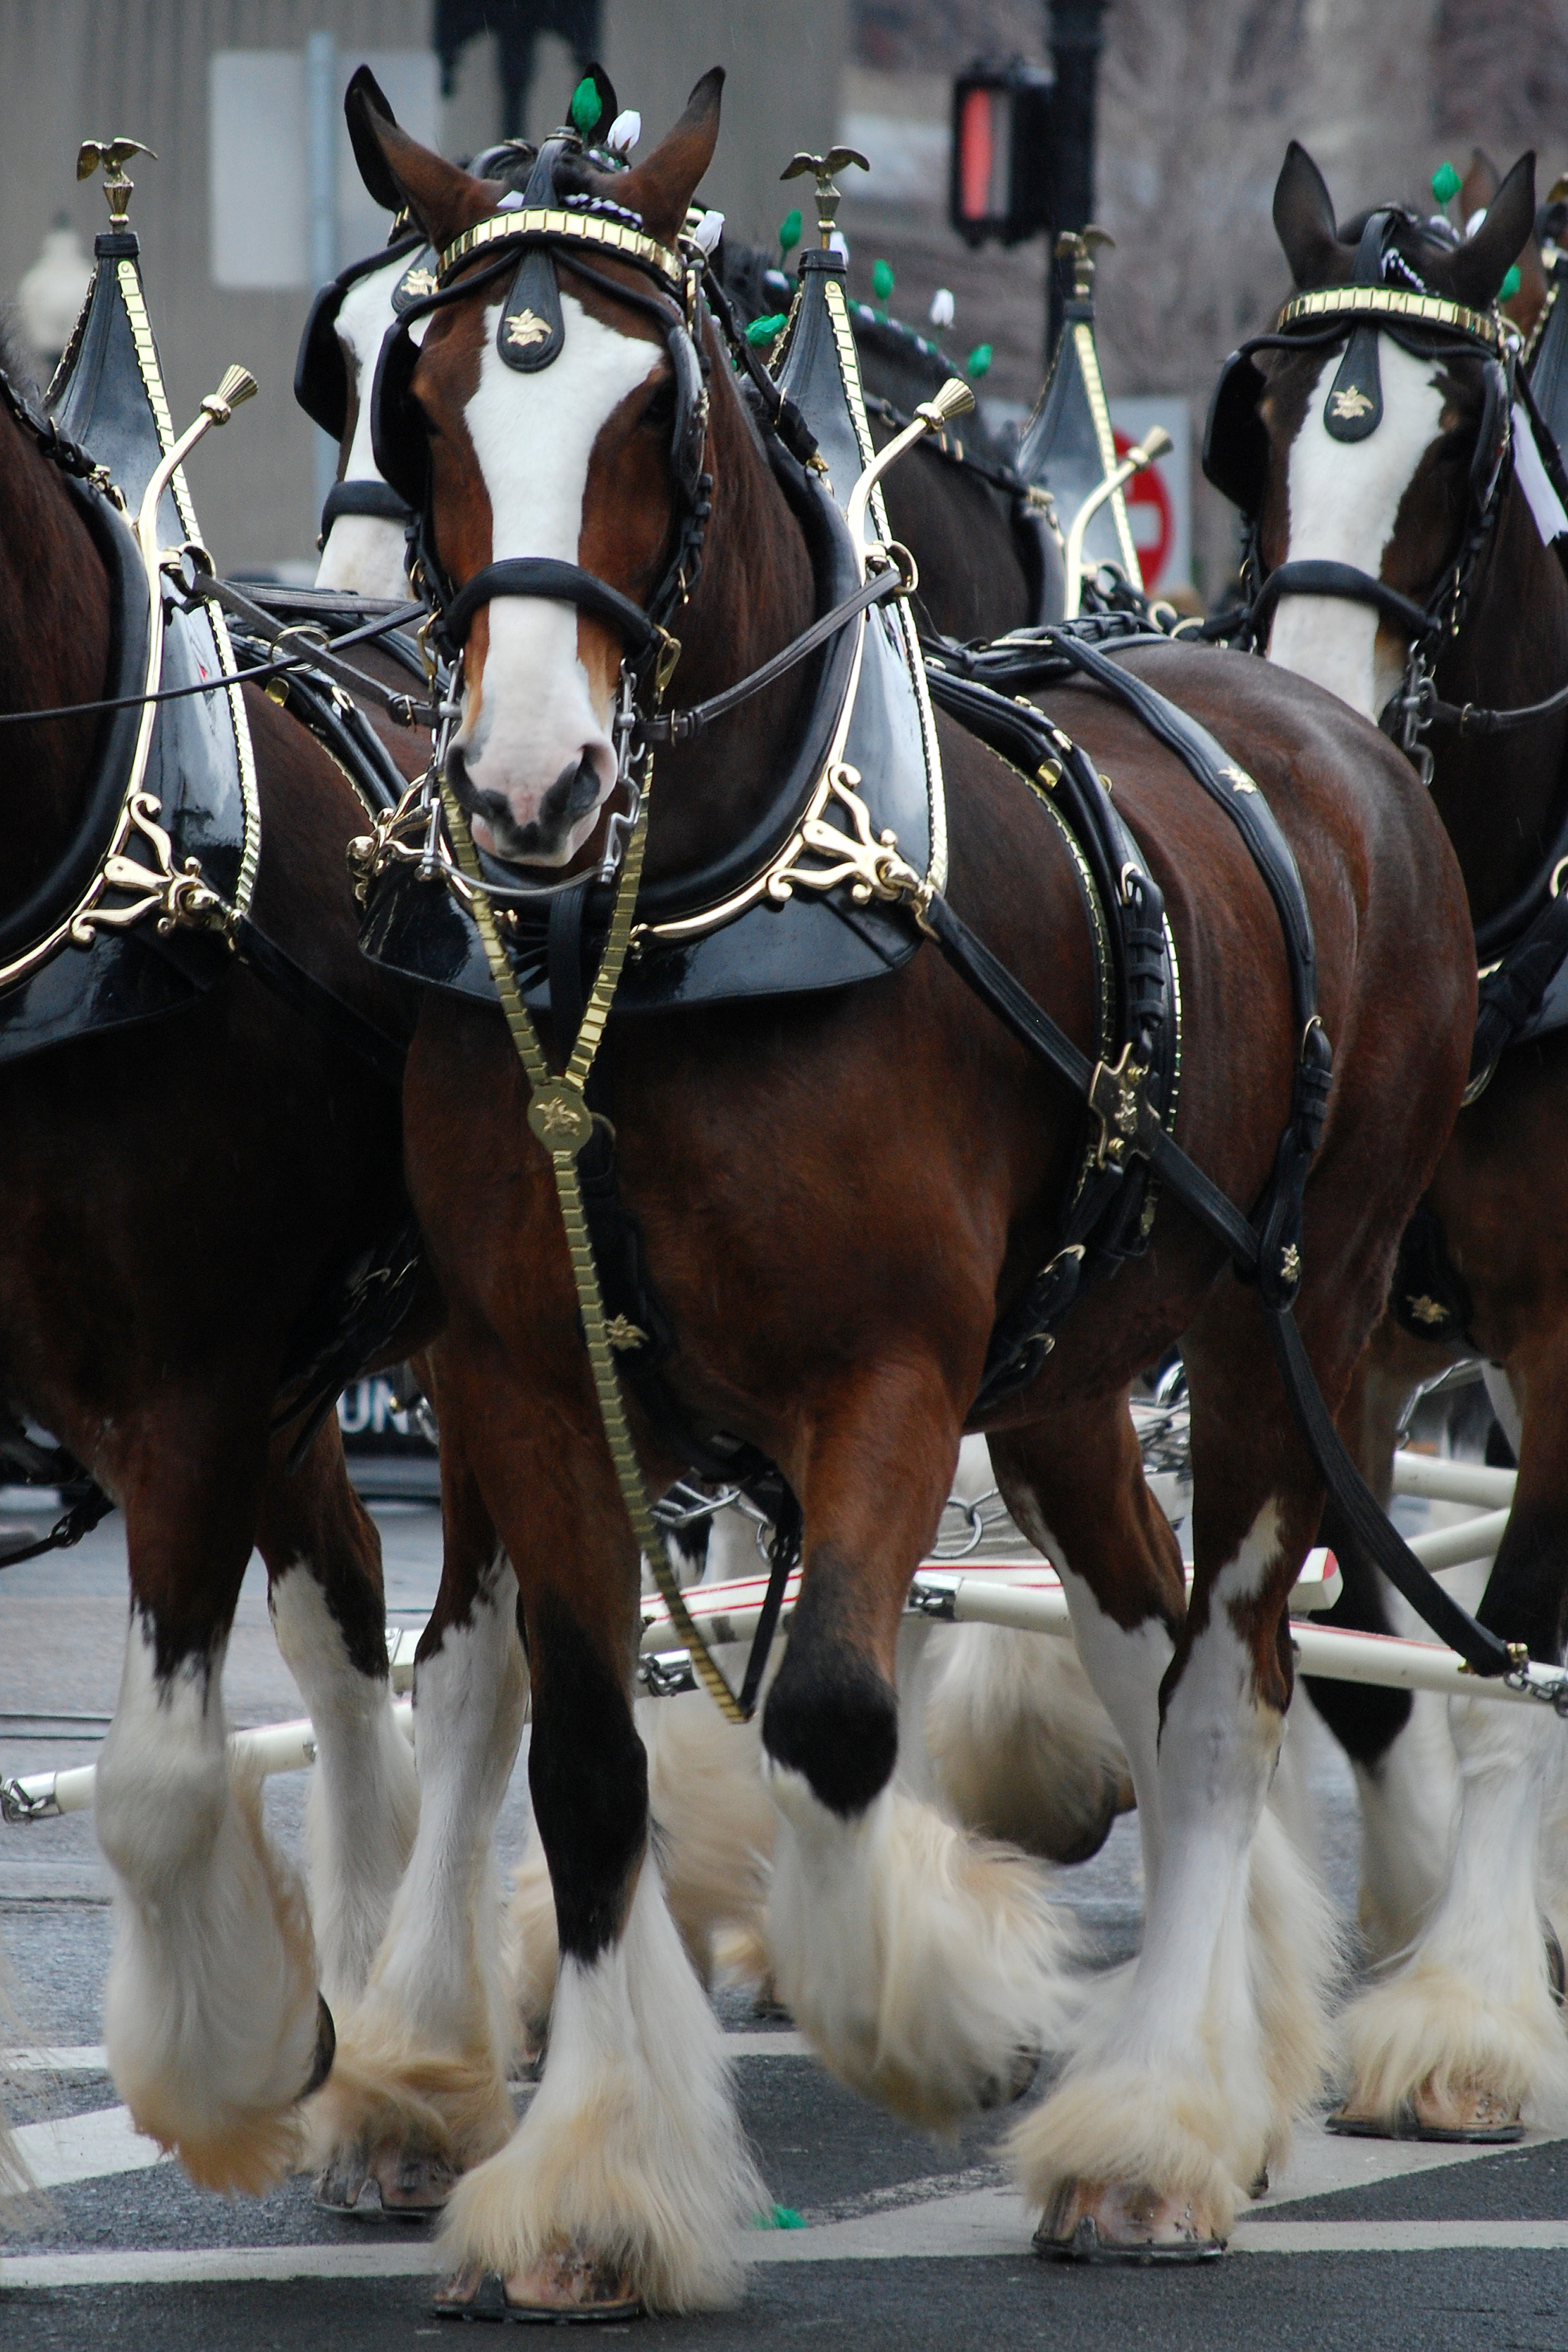 Budweiser Clydesdales - Wikipedia